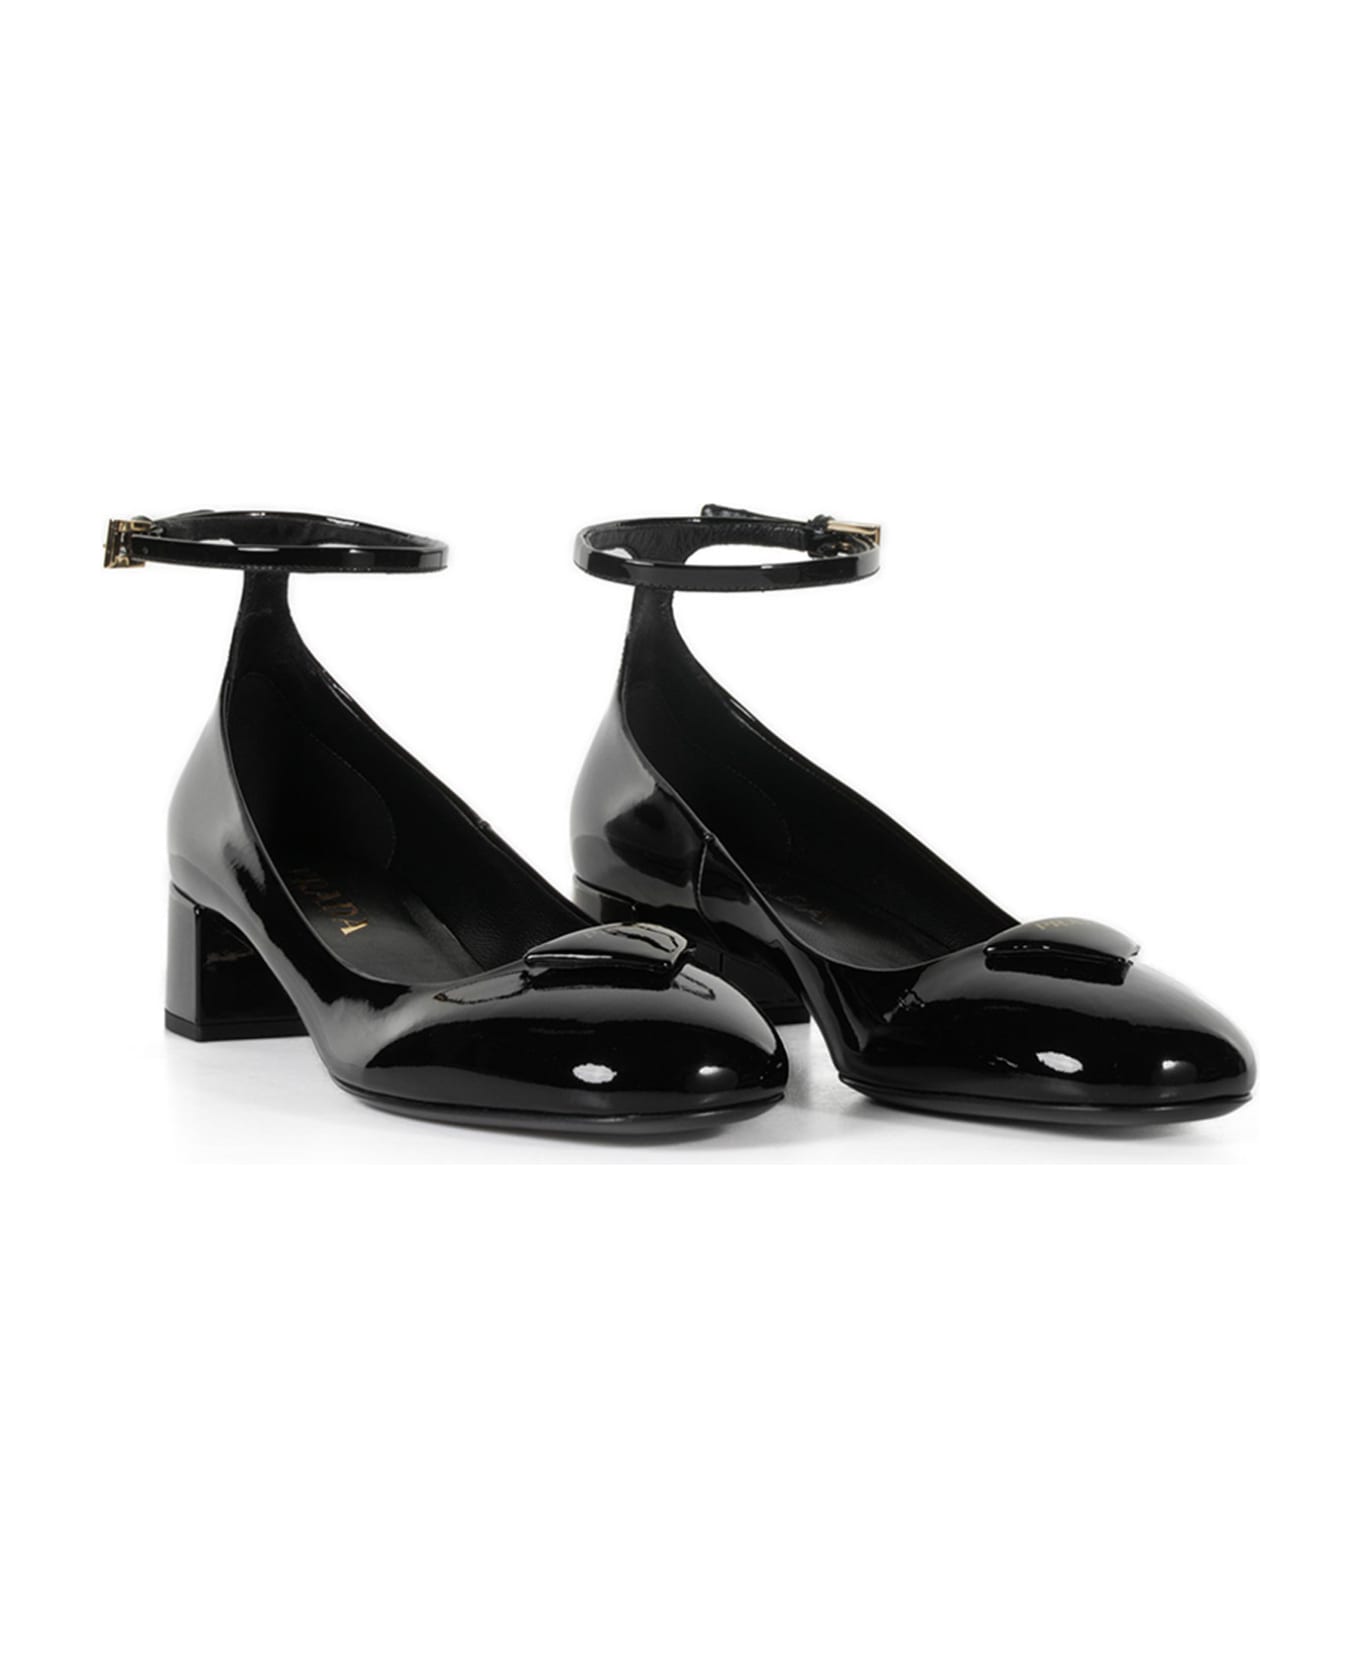 Prada Leather Pumps With Logo And Strap - NERO